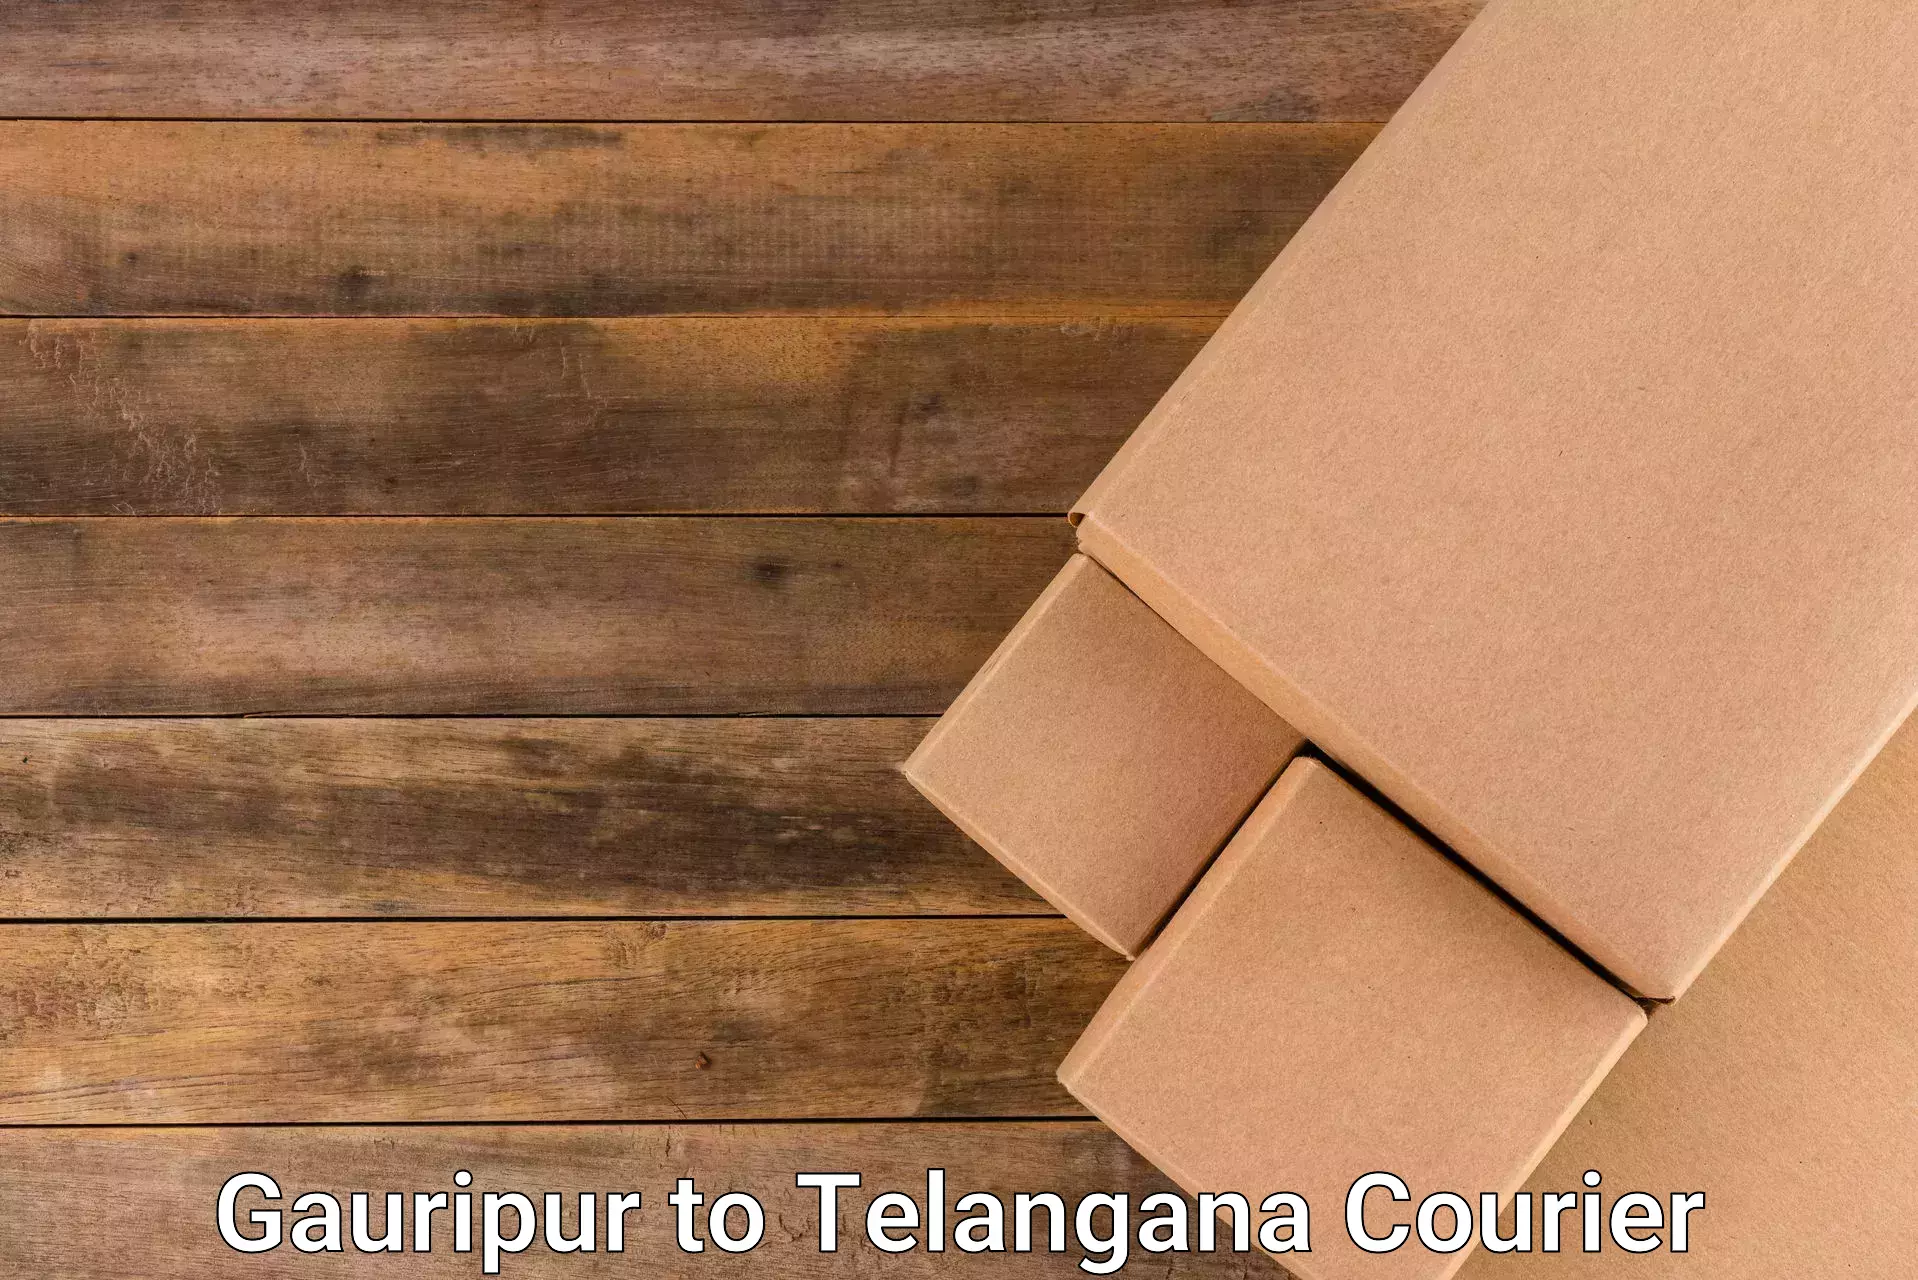 Subscription-based courier Gauripur to Ghanpur